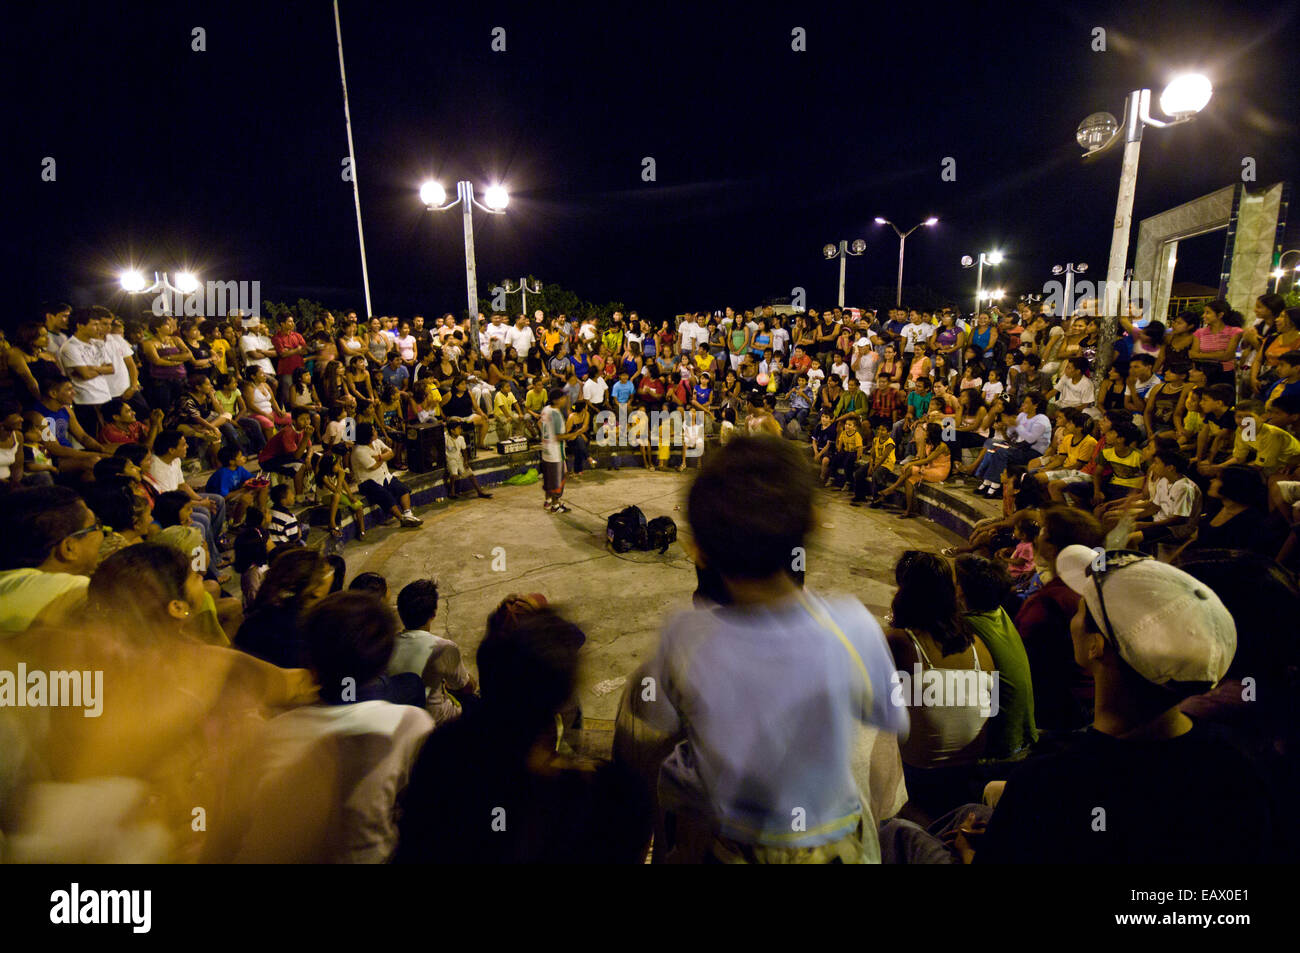 A crowd of onlookers is entertained by comedians at an open-air theatre in an Amazon river town. Stock Photo